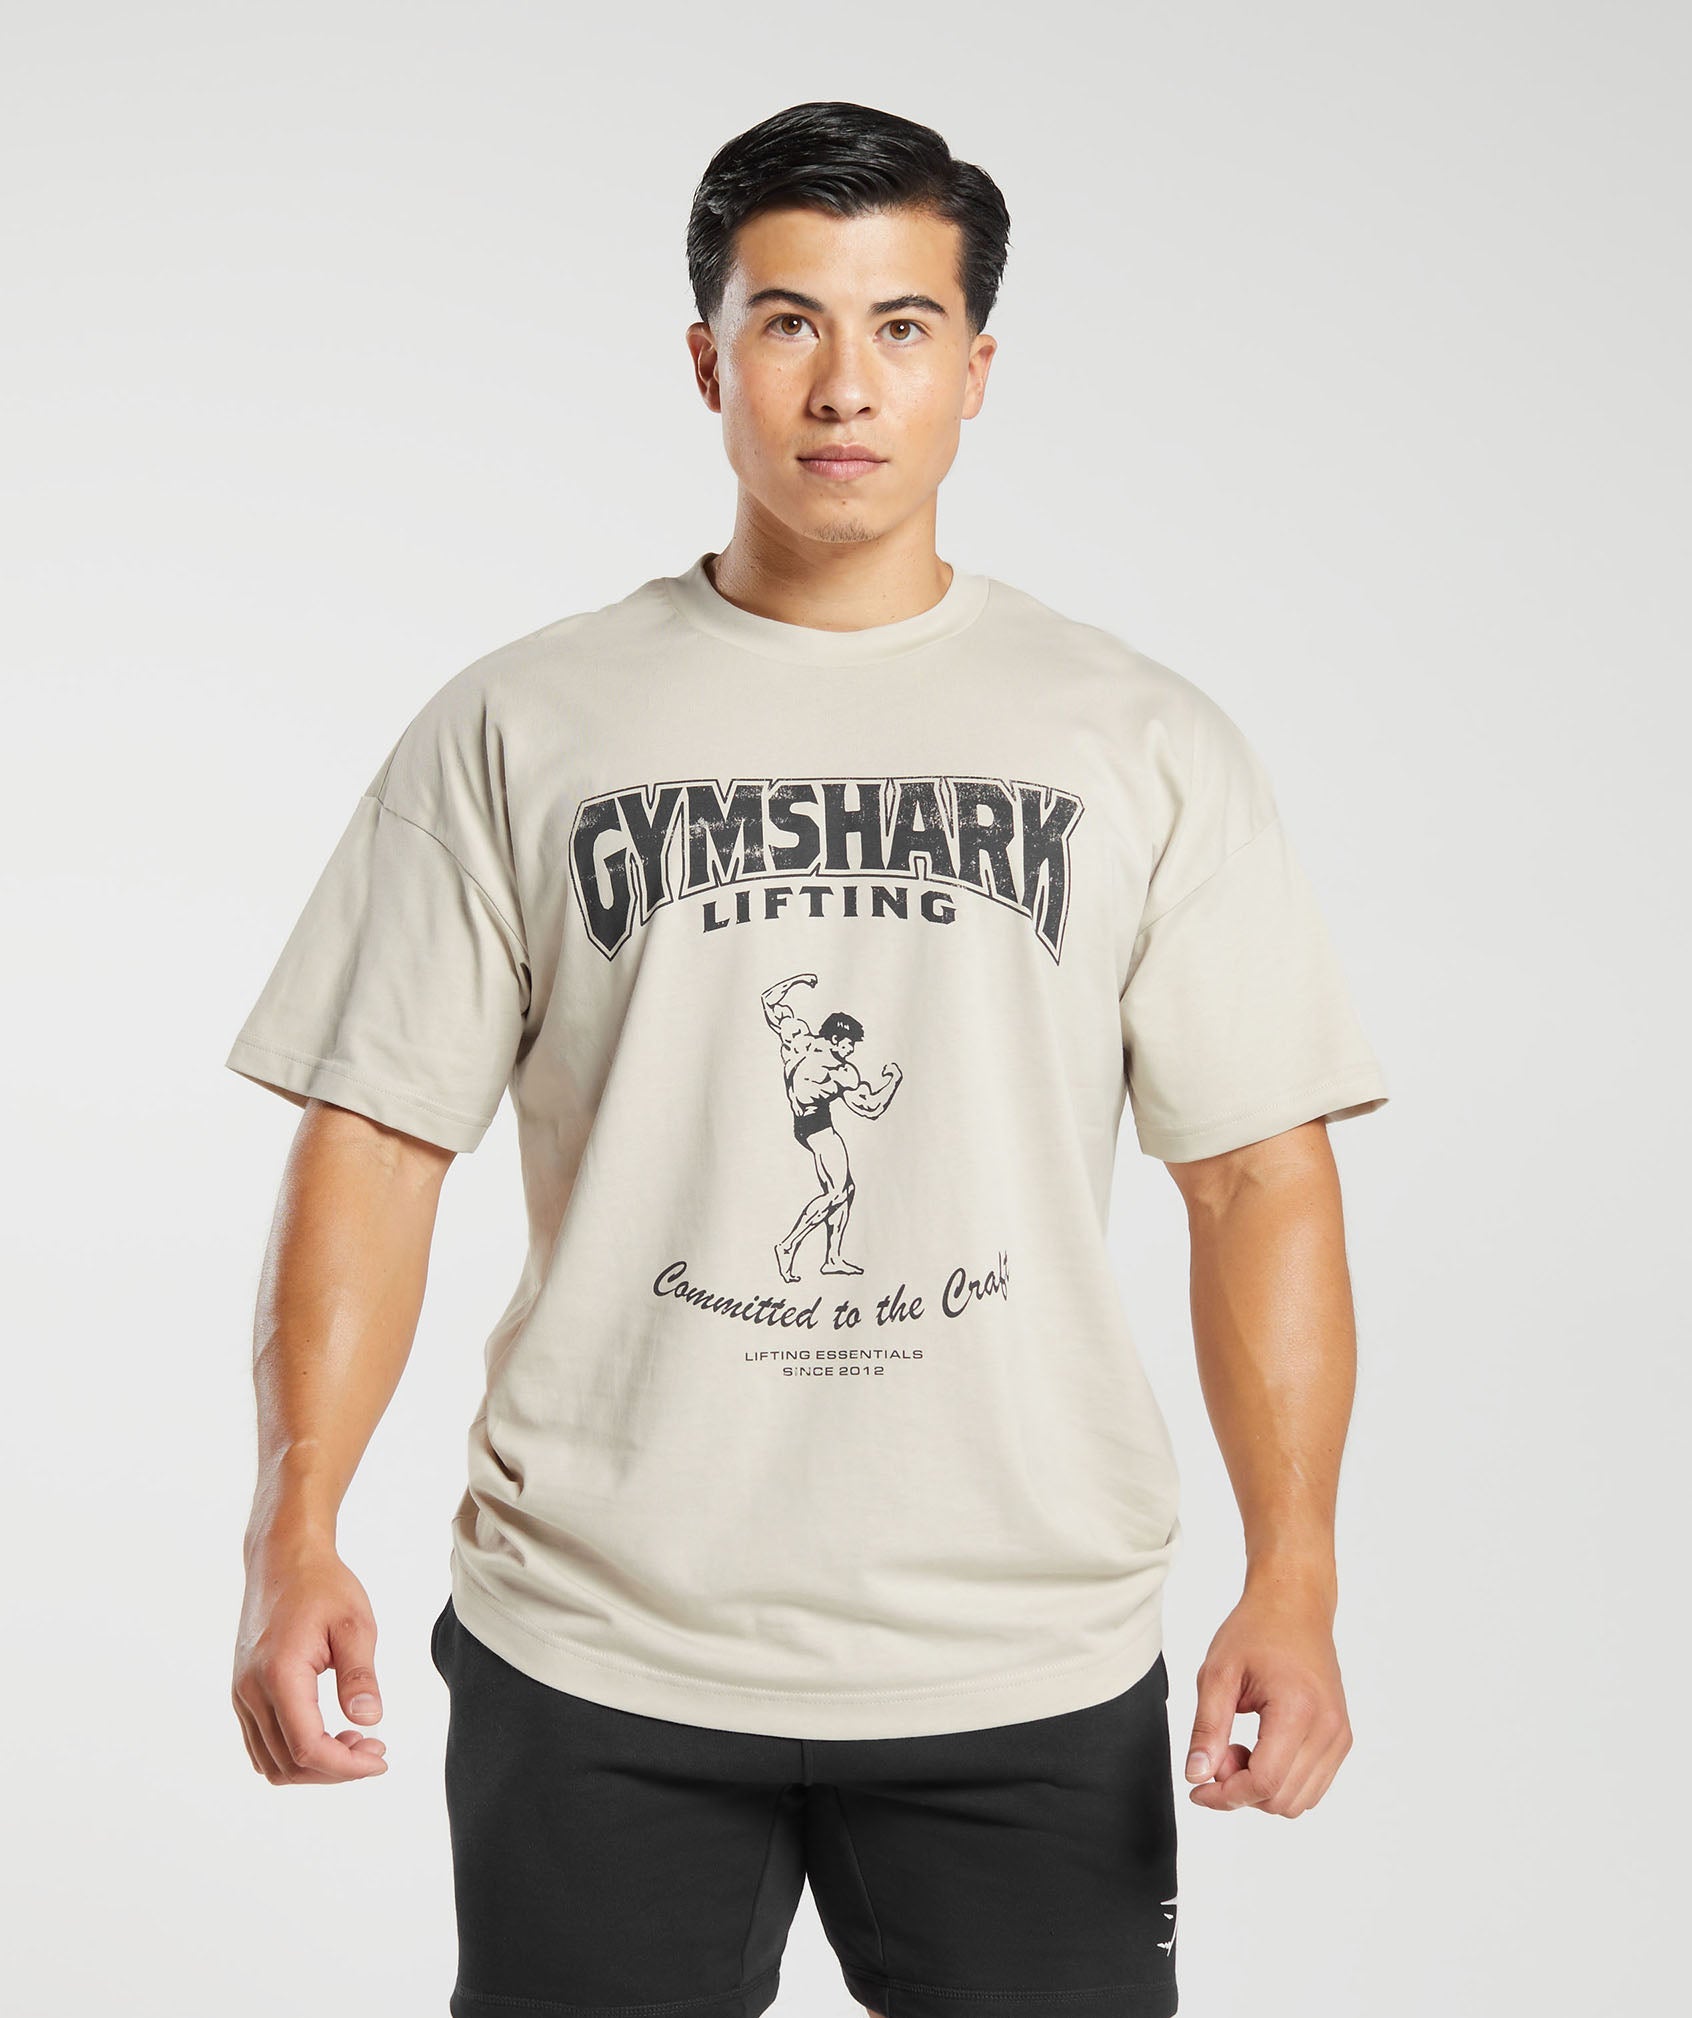 Gymshark Committed to the Craft T-Shirt - Pebble Grey